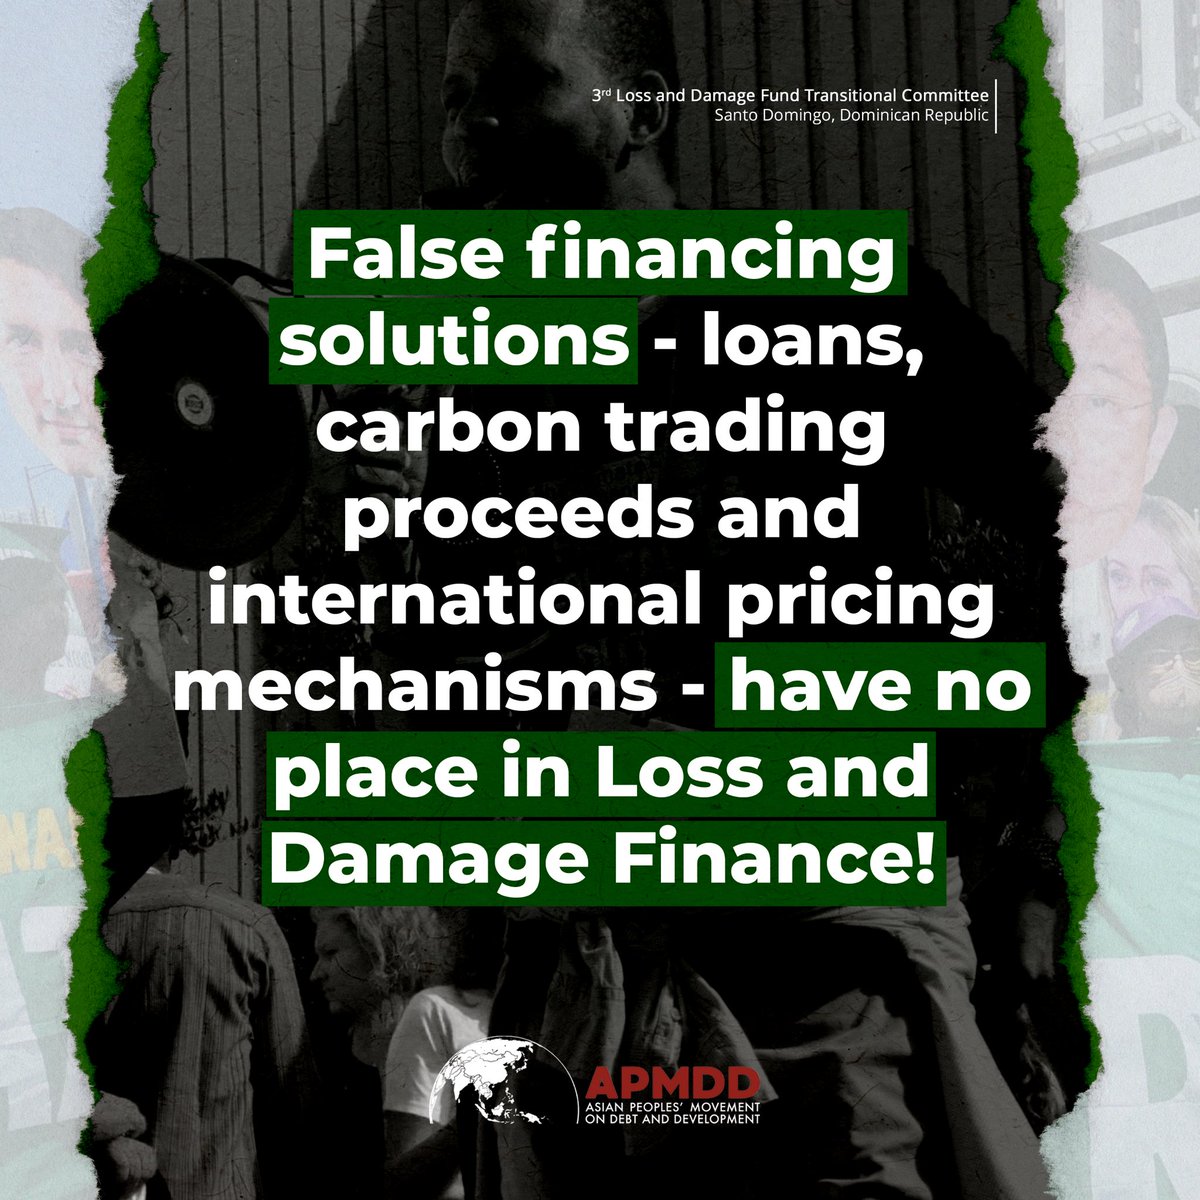 Finance for #LossAndDamage is part of the #Reparations owed to the Global South. Finance instruments that further bury them in debt & schemes that perpetuate continuous extraction of #FossilFuels should be rejected.